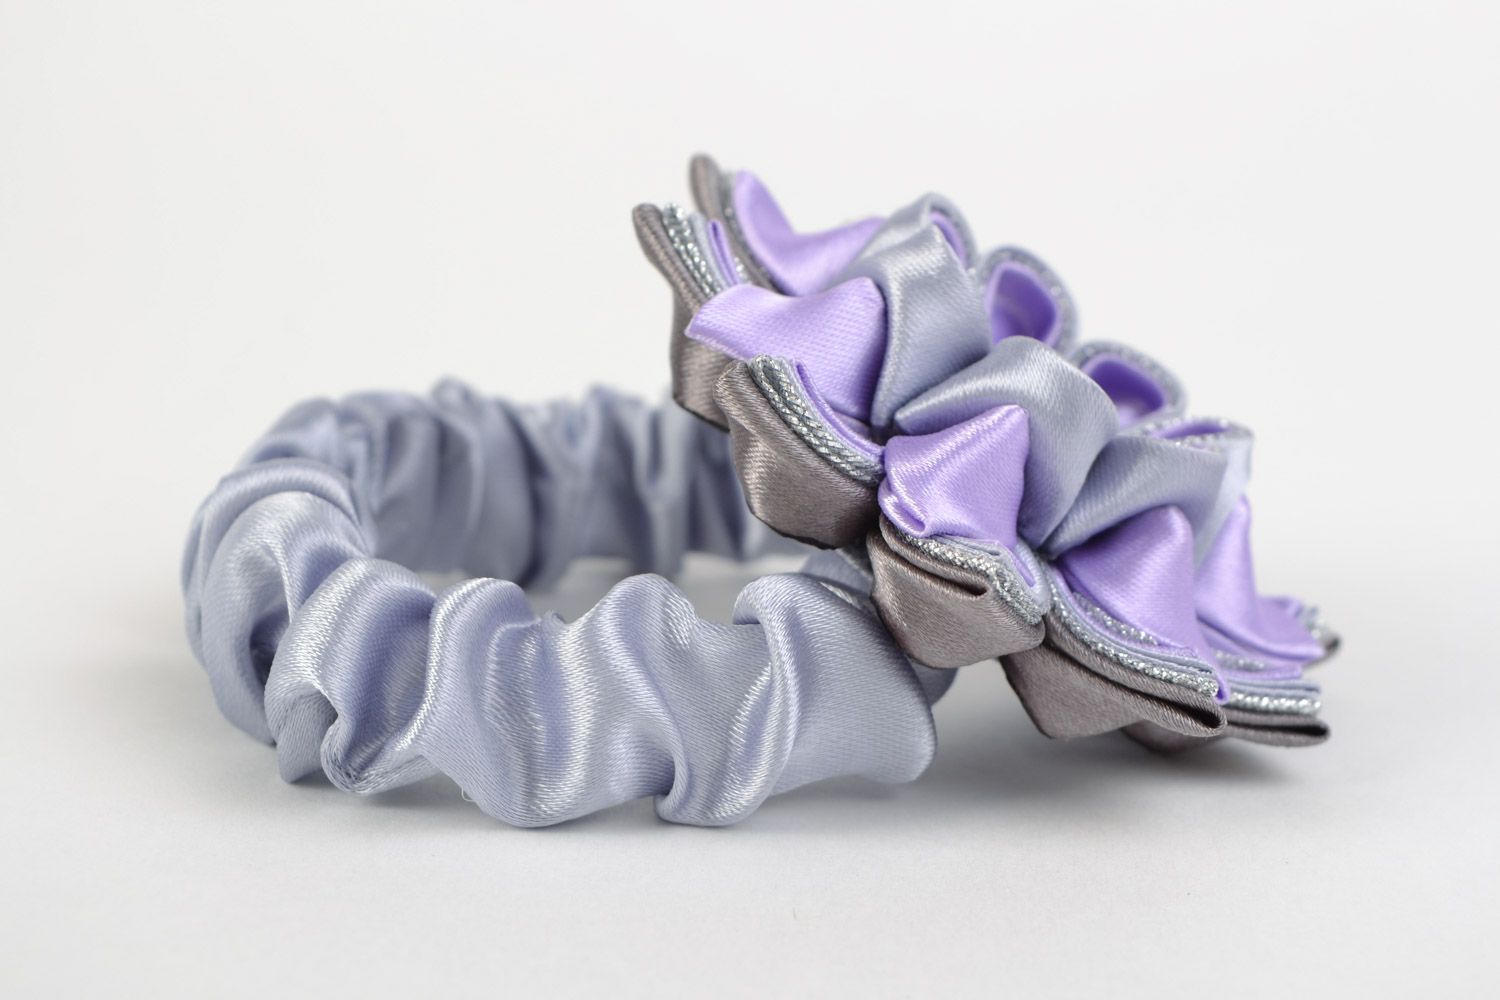 Large handmade kanzashi flower hair tie of lilac and gray colors photo 2